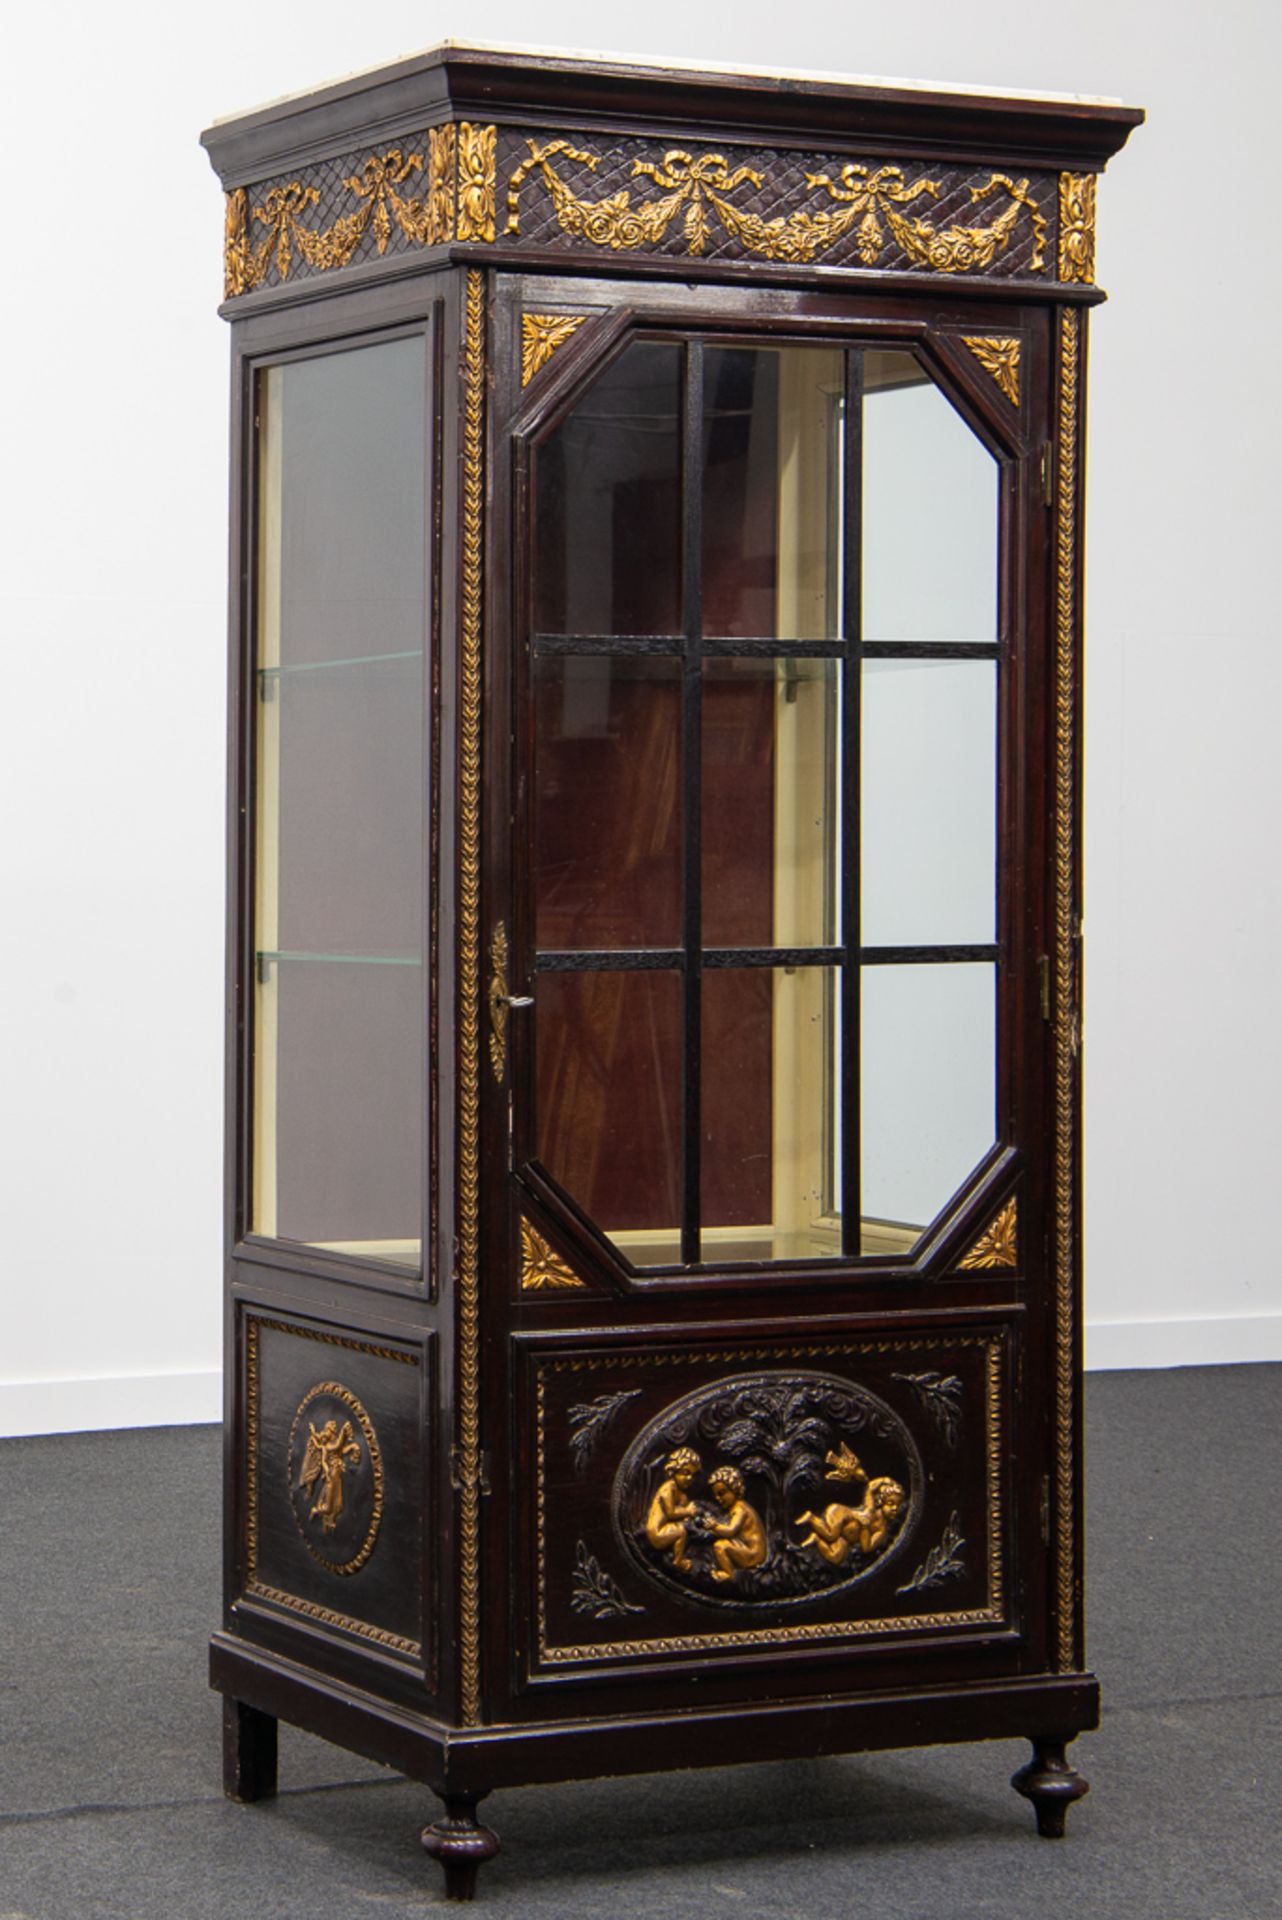 Display cabinet - Image 9 of 13